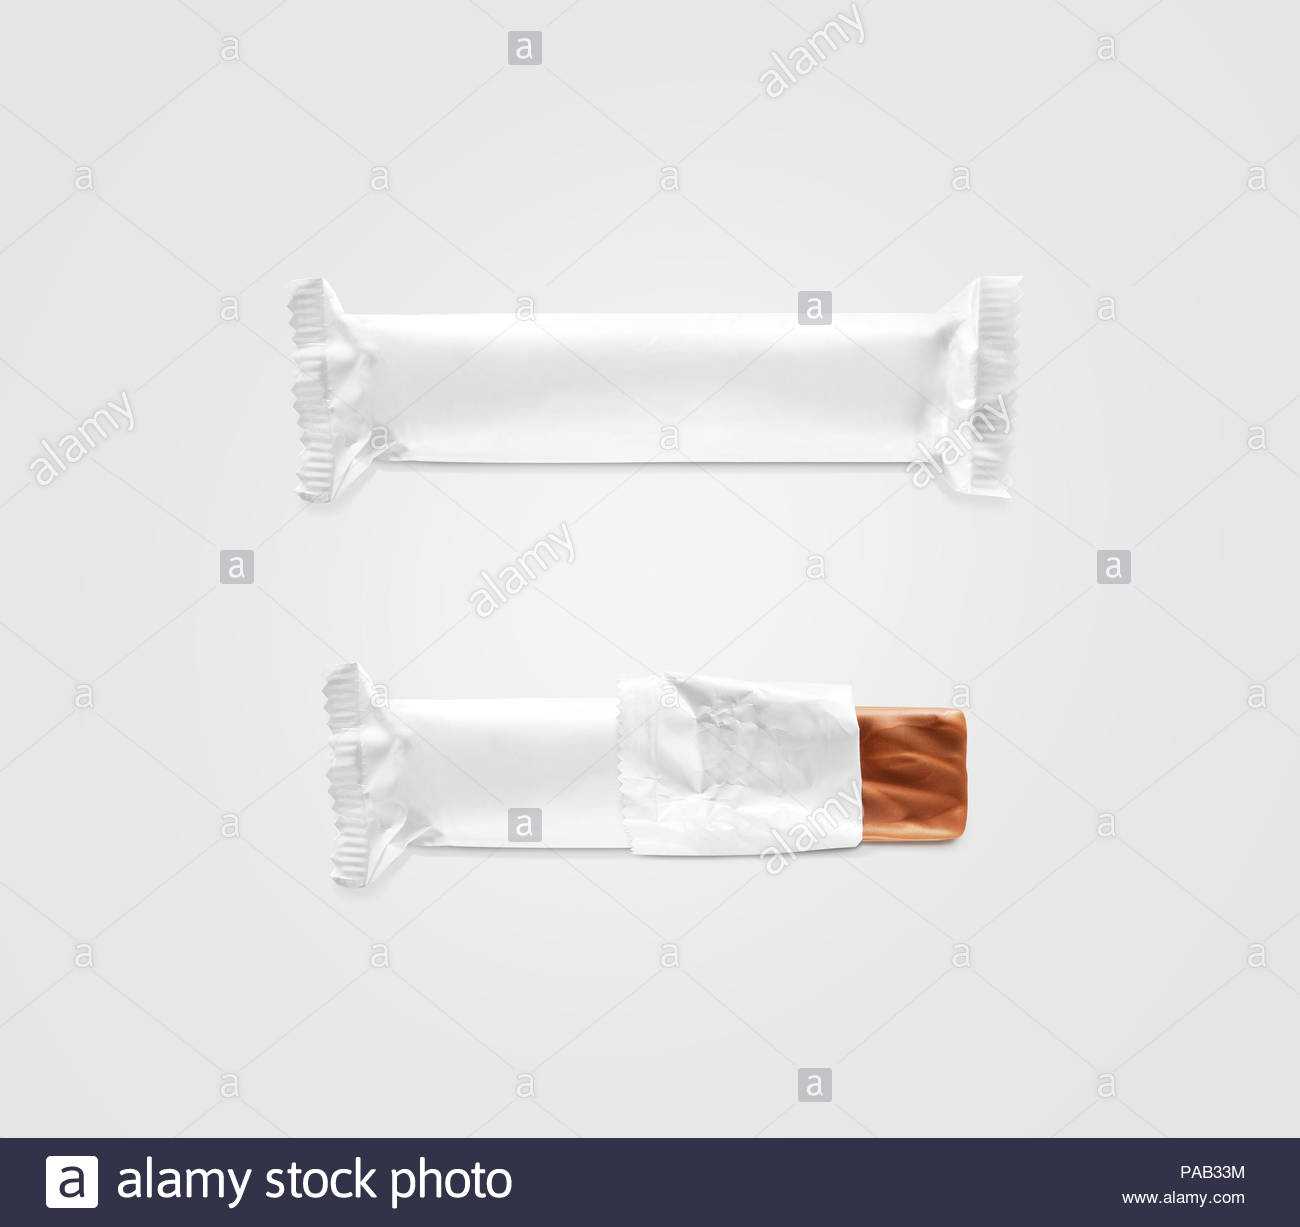 Blank White Candy Bar Plastic Wrap Mockup Isolated. Closed Regarding Blank Candy Bar Wrapper Template